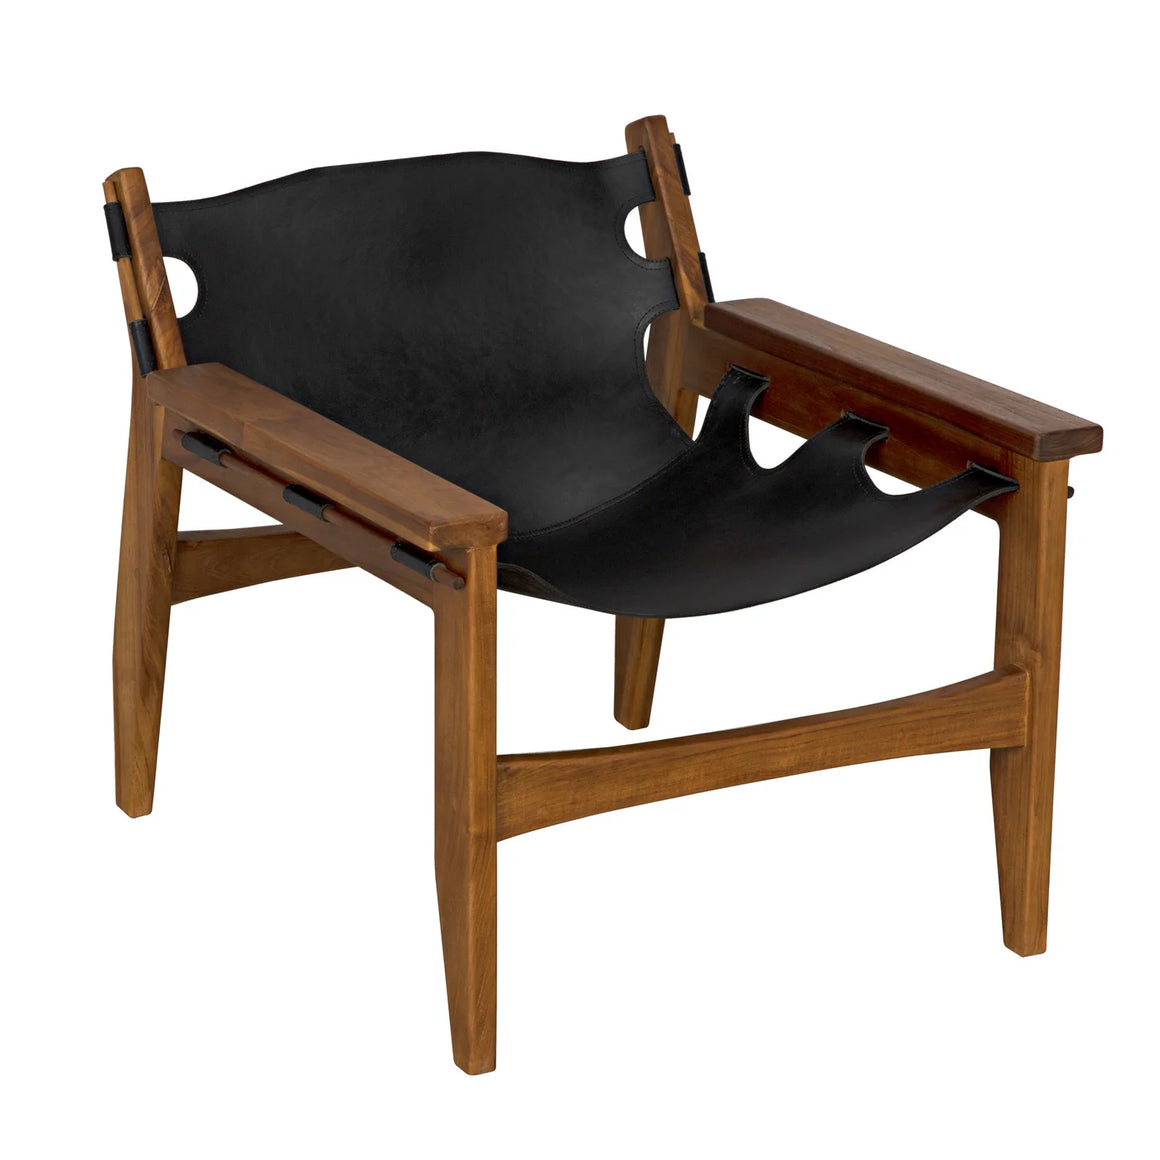 Nomo Chair - Teak with Leather